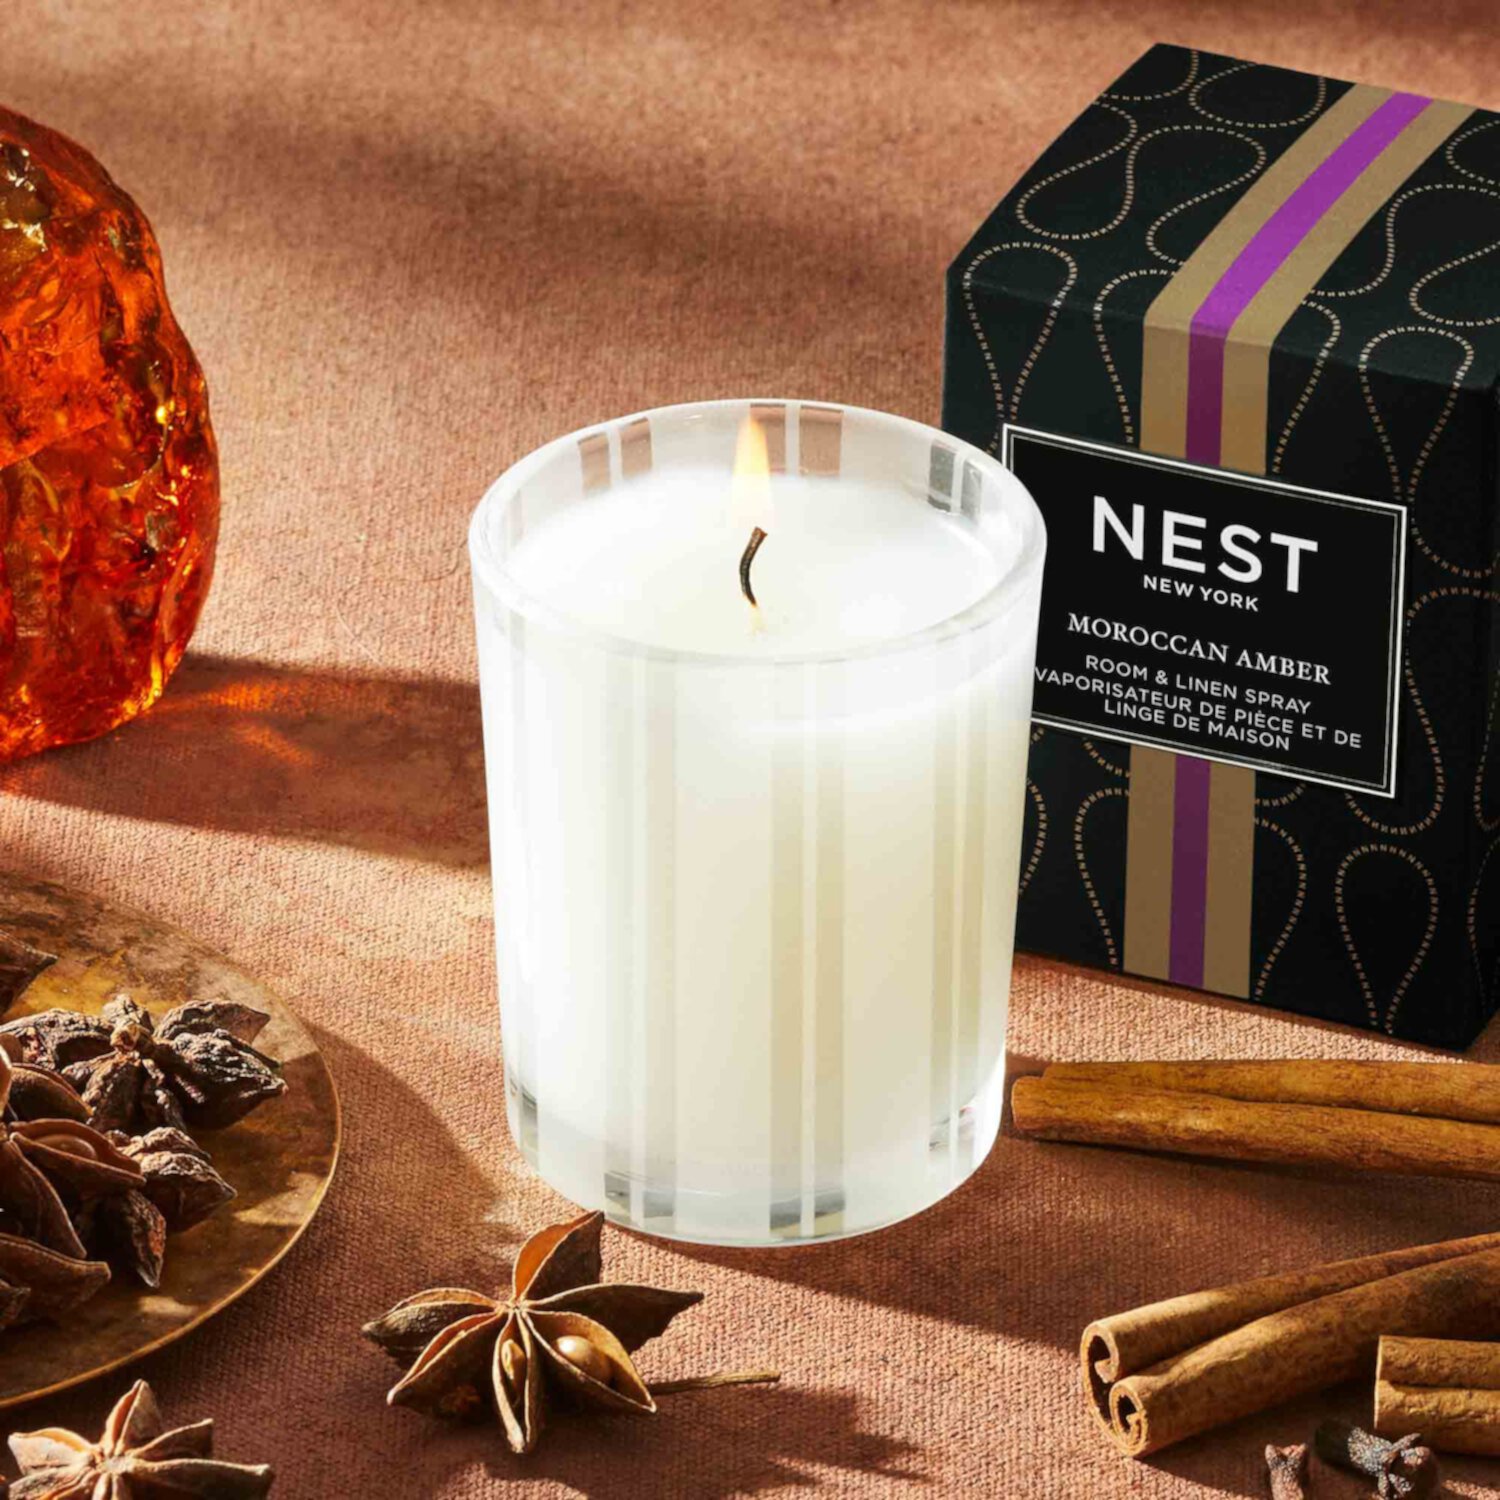 Mini Moroccan Amber Candle Nest New York